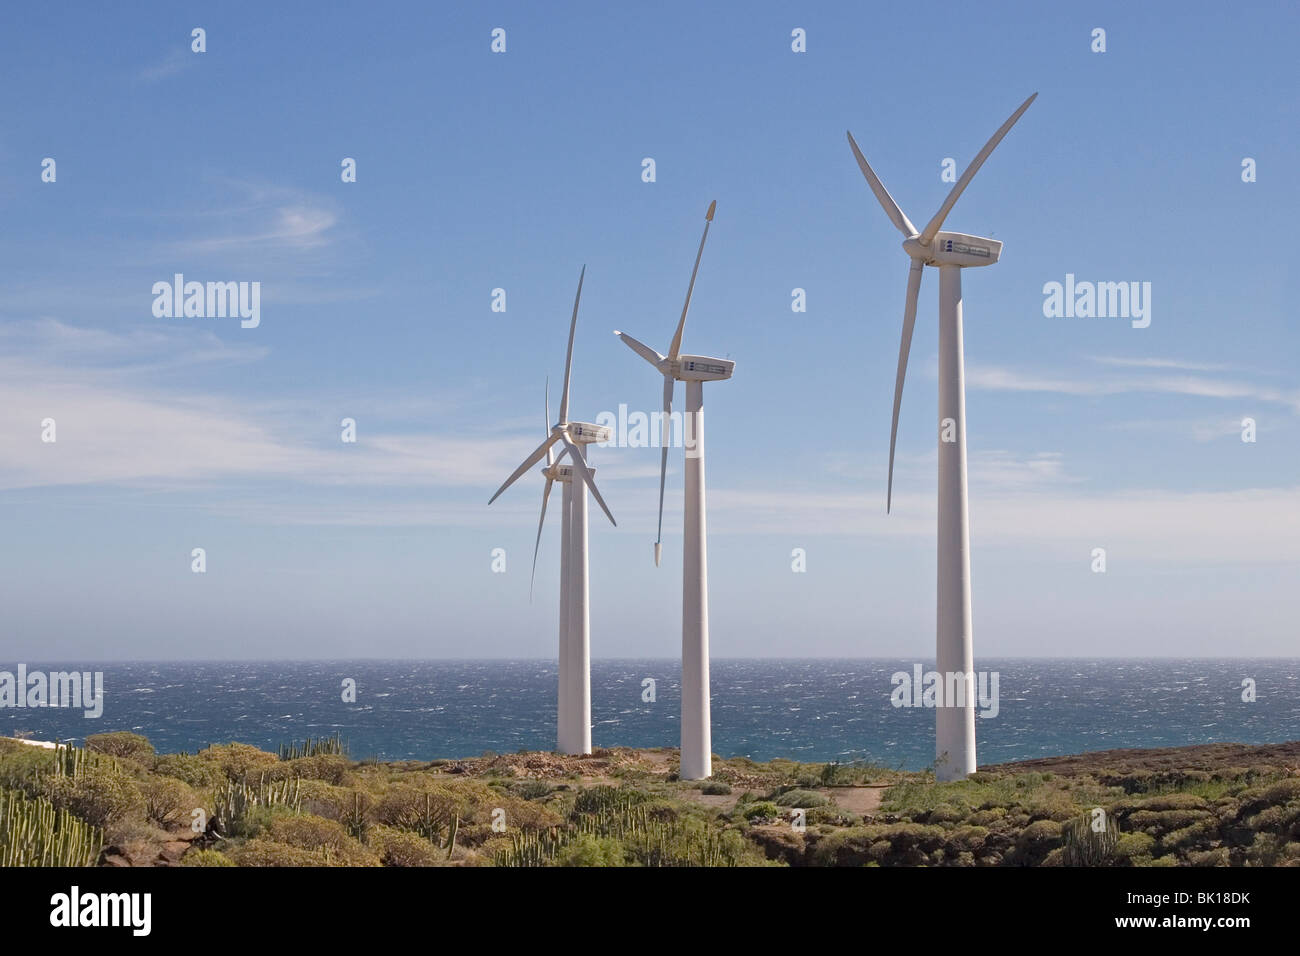 Wind power station on a coast with blue sky Stock Photo